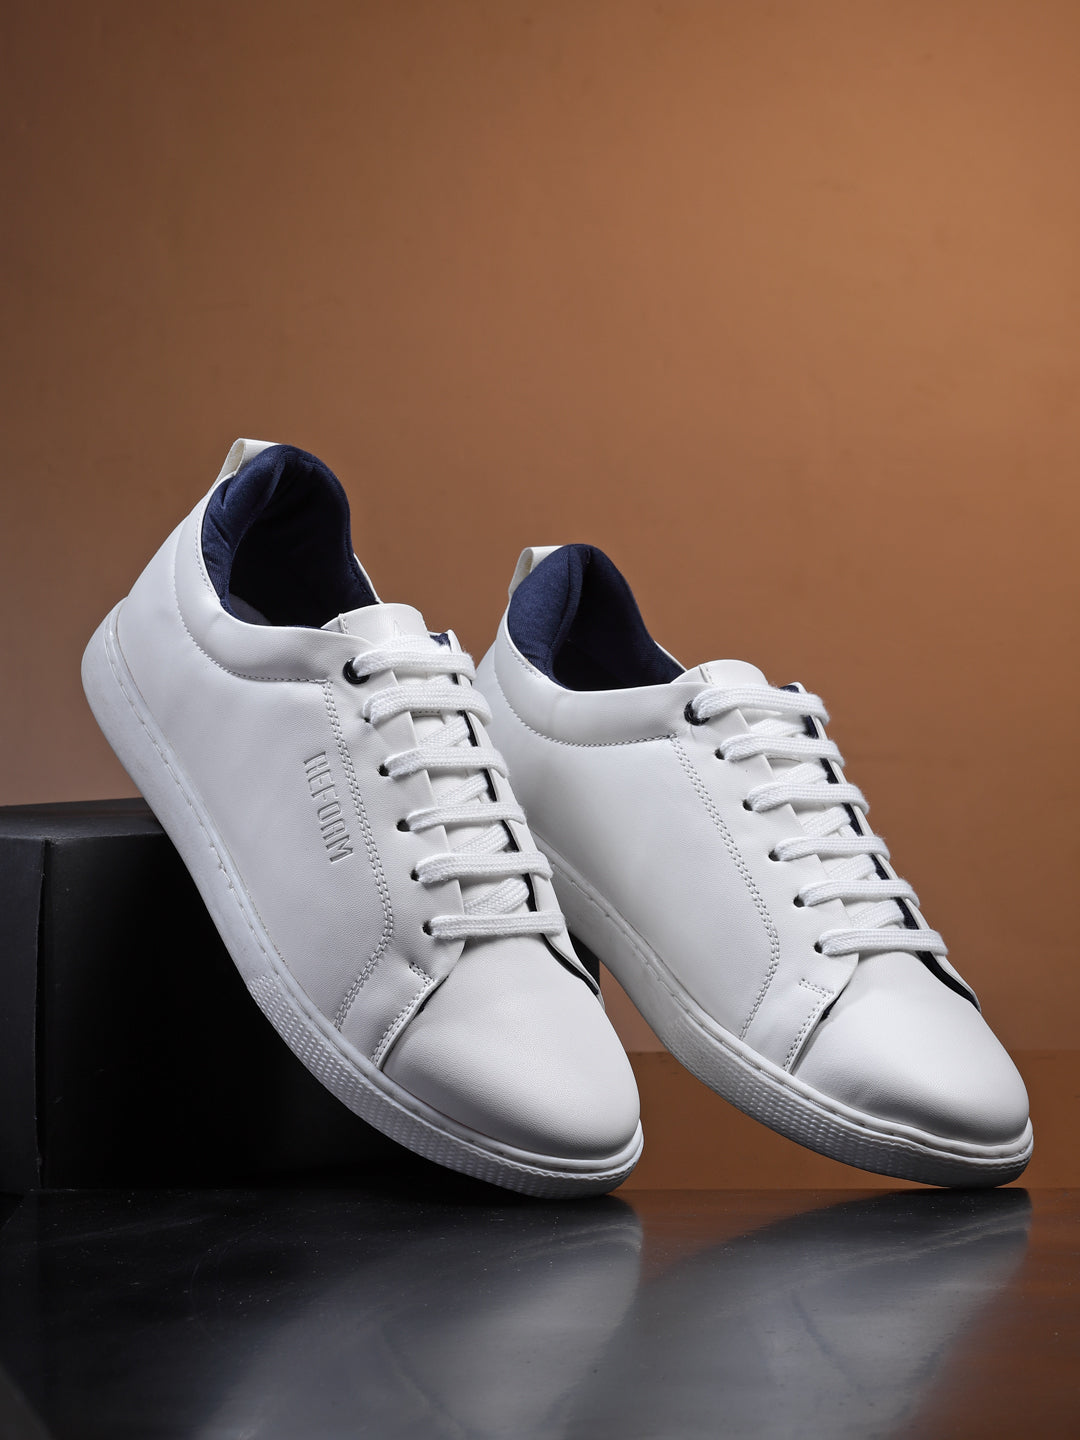 Amazon.com | Mens White Sneakers Leather Simple Casual Shoes Fashion  Sneakers for Men Classic Low Top Sneaker Breathable Tennis Shoes(White-GR,US8)  | Fashion Sneakers